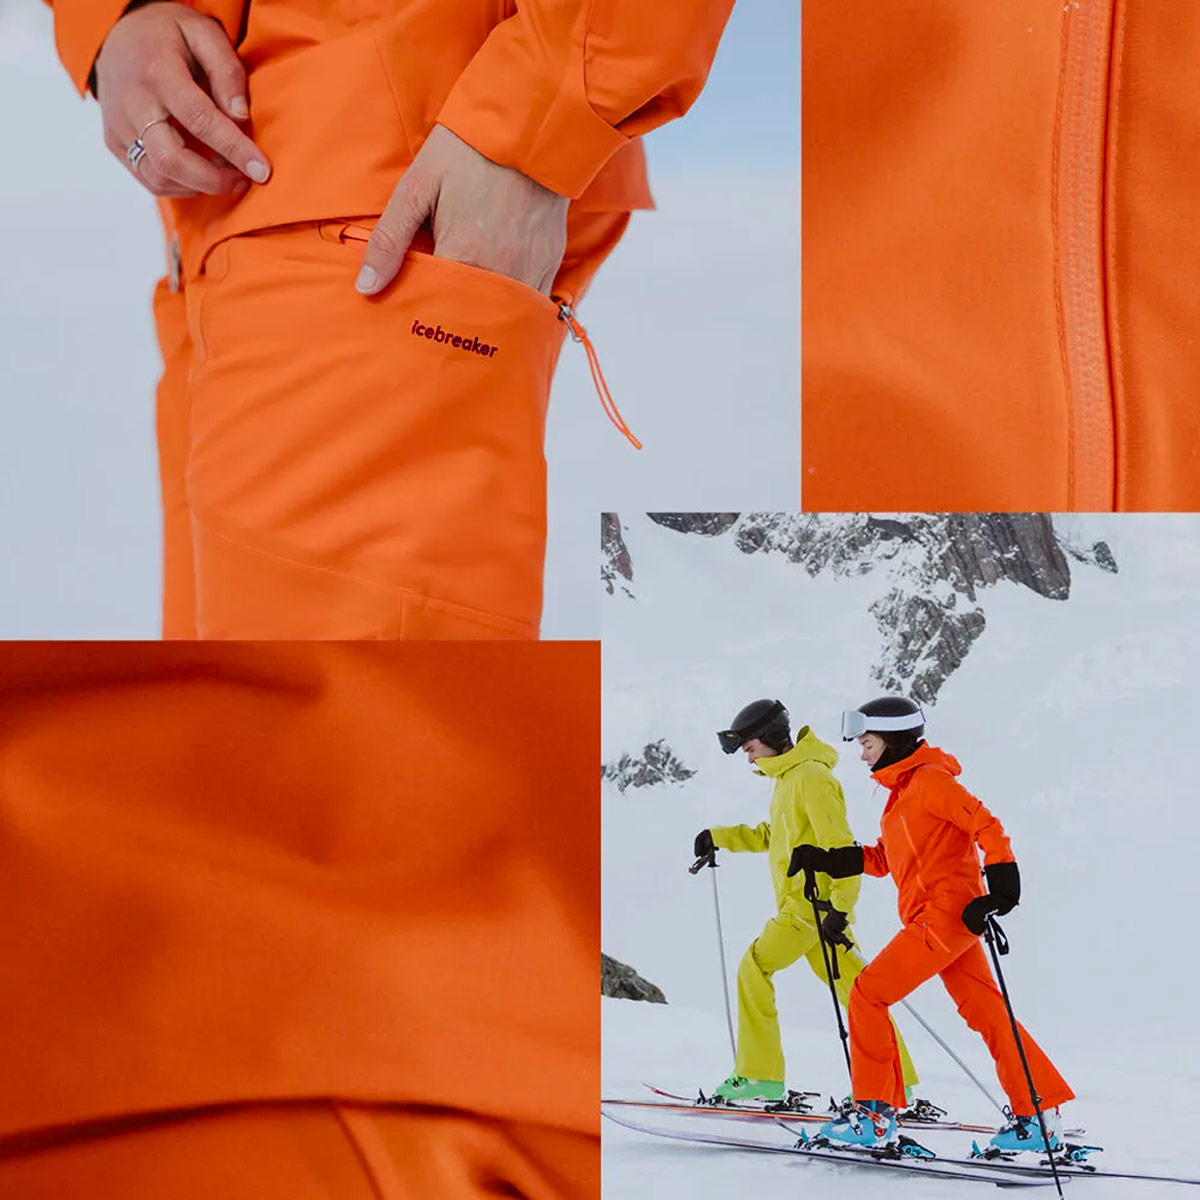 Composite image with four photos showing orange Icebreaker ski clothing, with people skiing